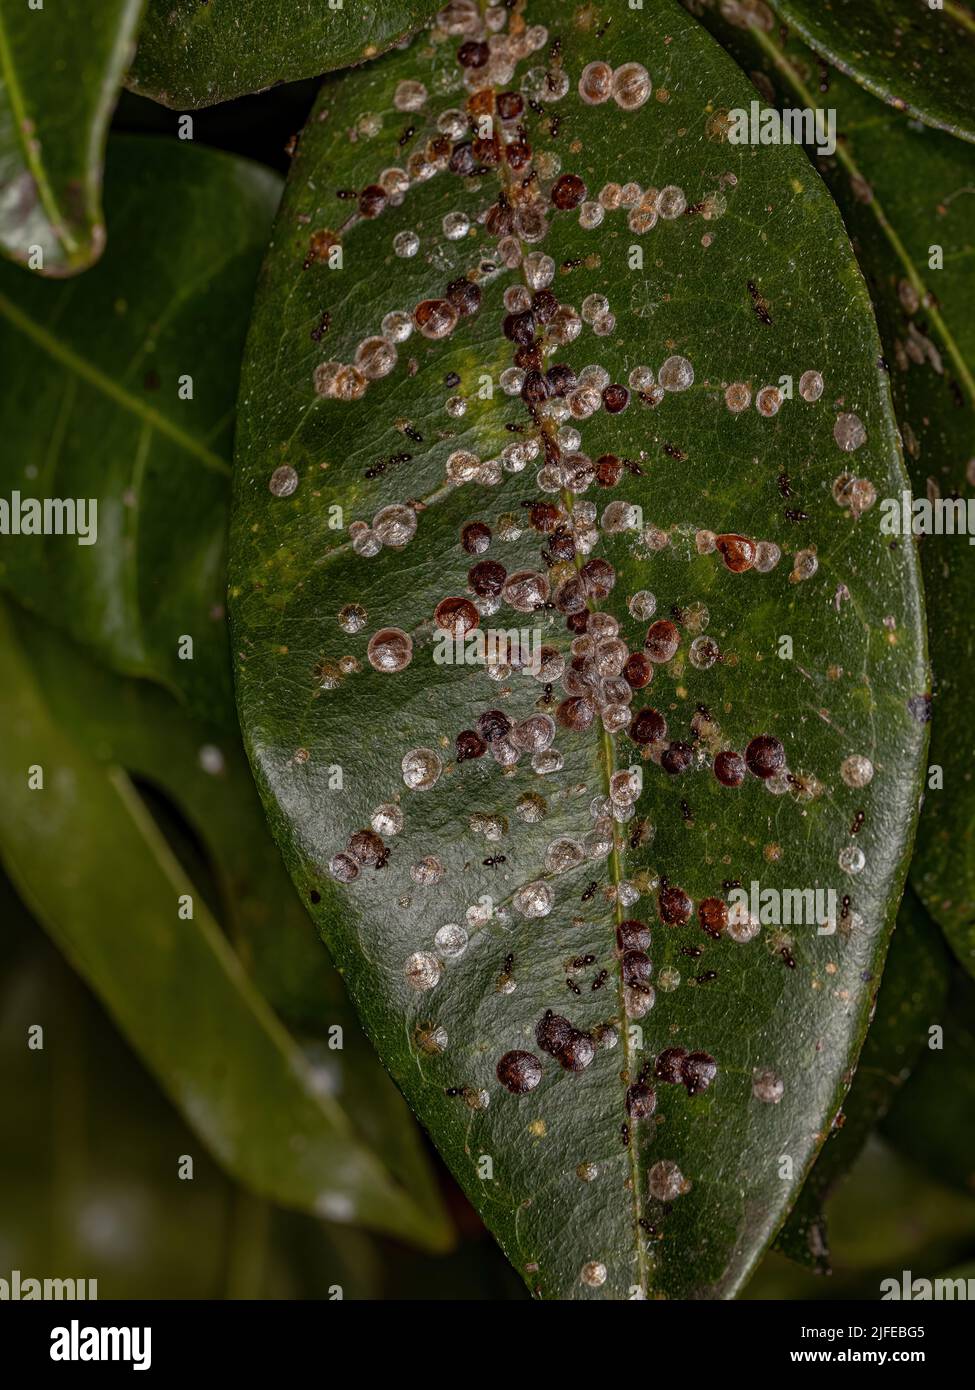 White Scale Insects of the Superfamily Coccoidea on a Provision Tree Leaf of the species Pachira aquatica Stock Photo